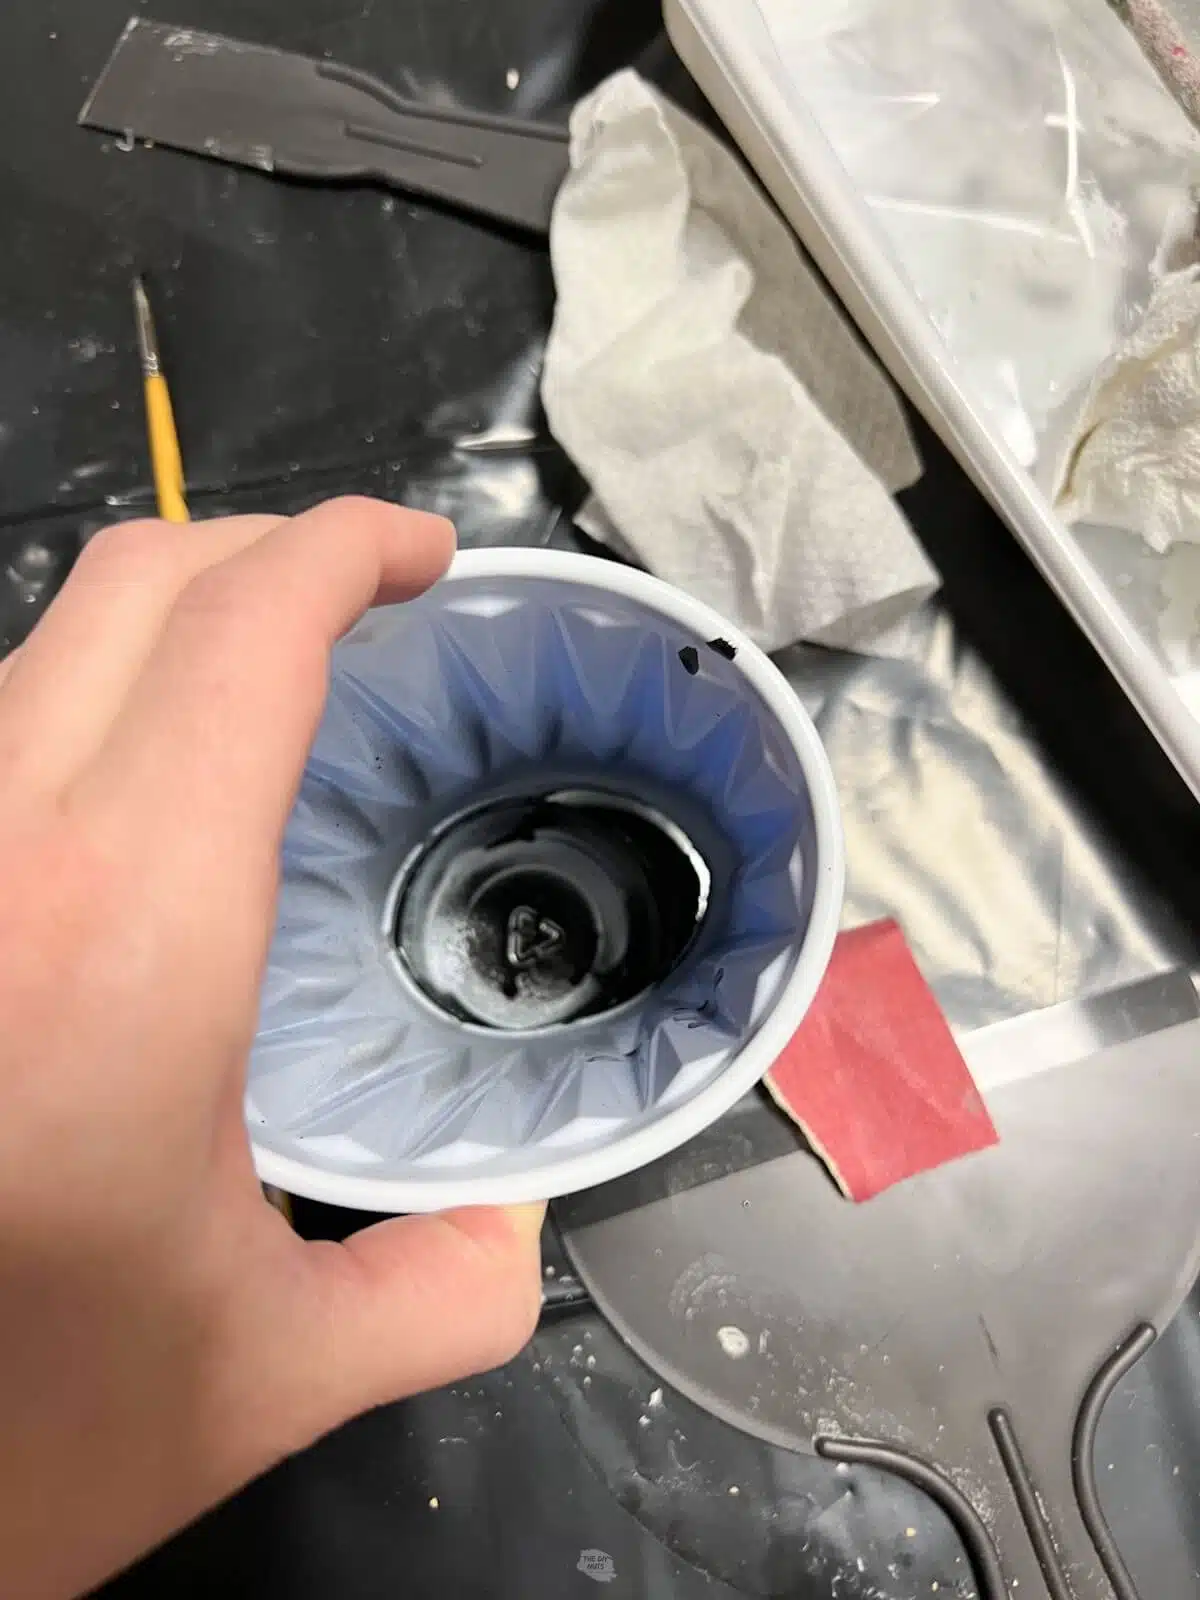 hand holding plastic cup with spray paint and hole in cup.